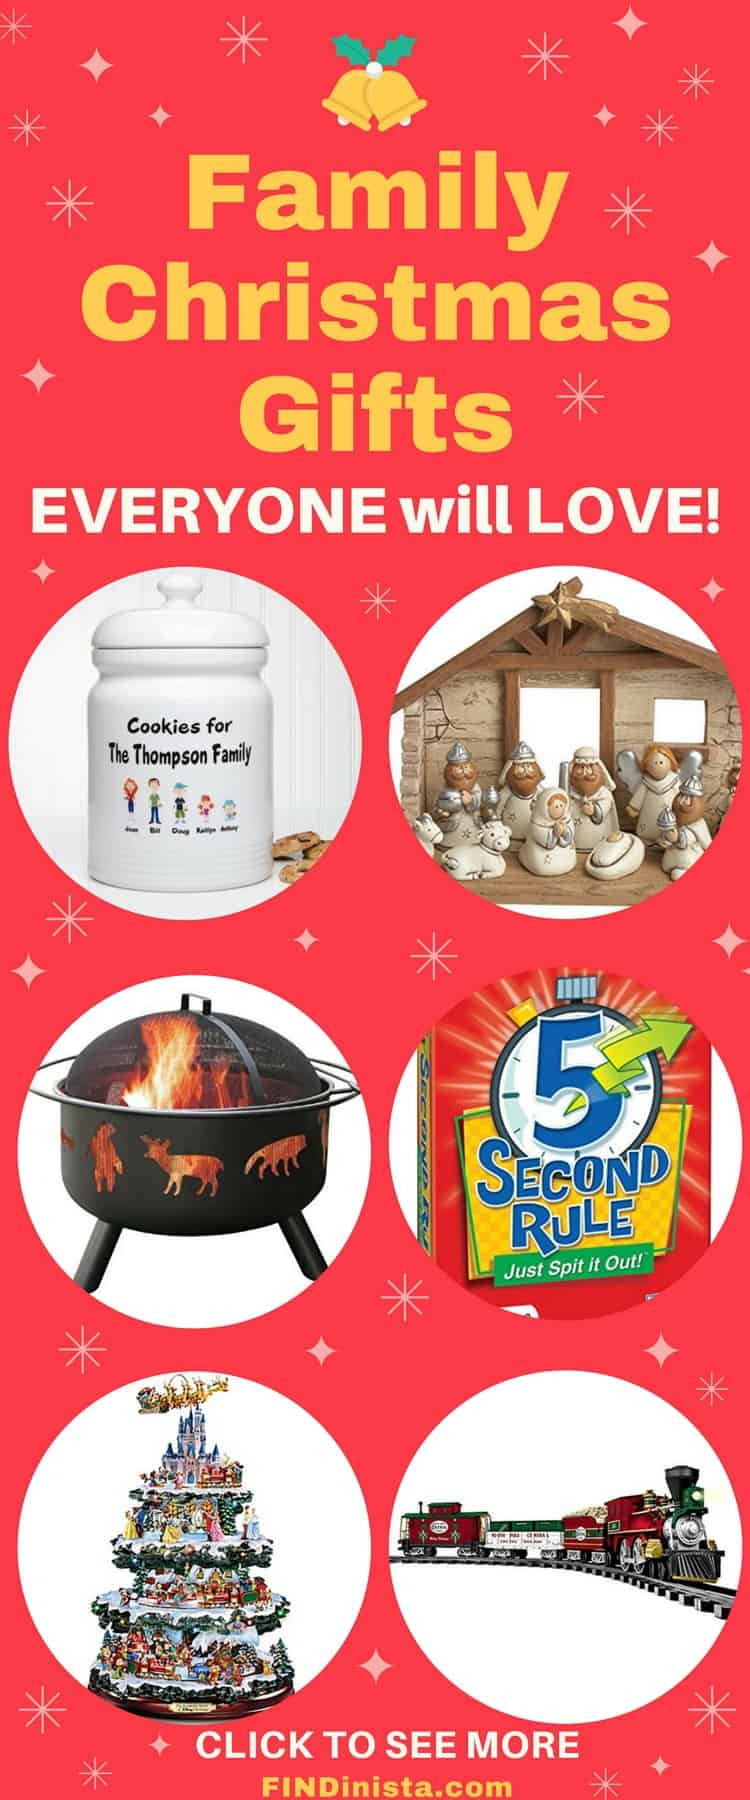 Holiday Gift Ideas For Family
 Best Family Gift Ideas for Christmas Fun Gifts the Whole